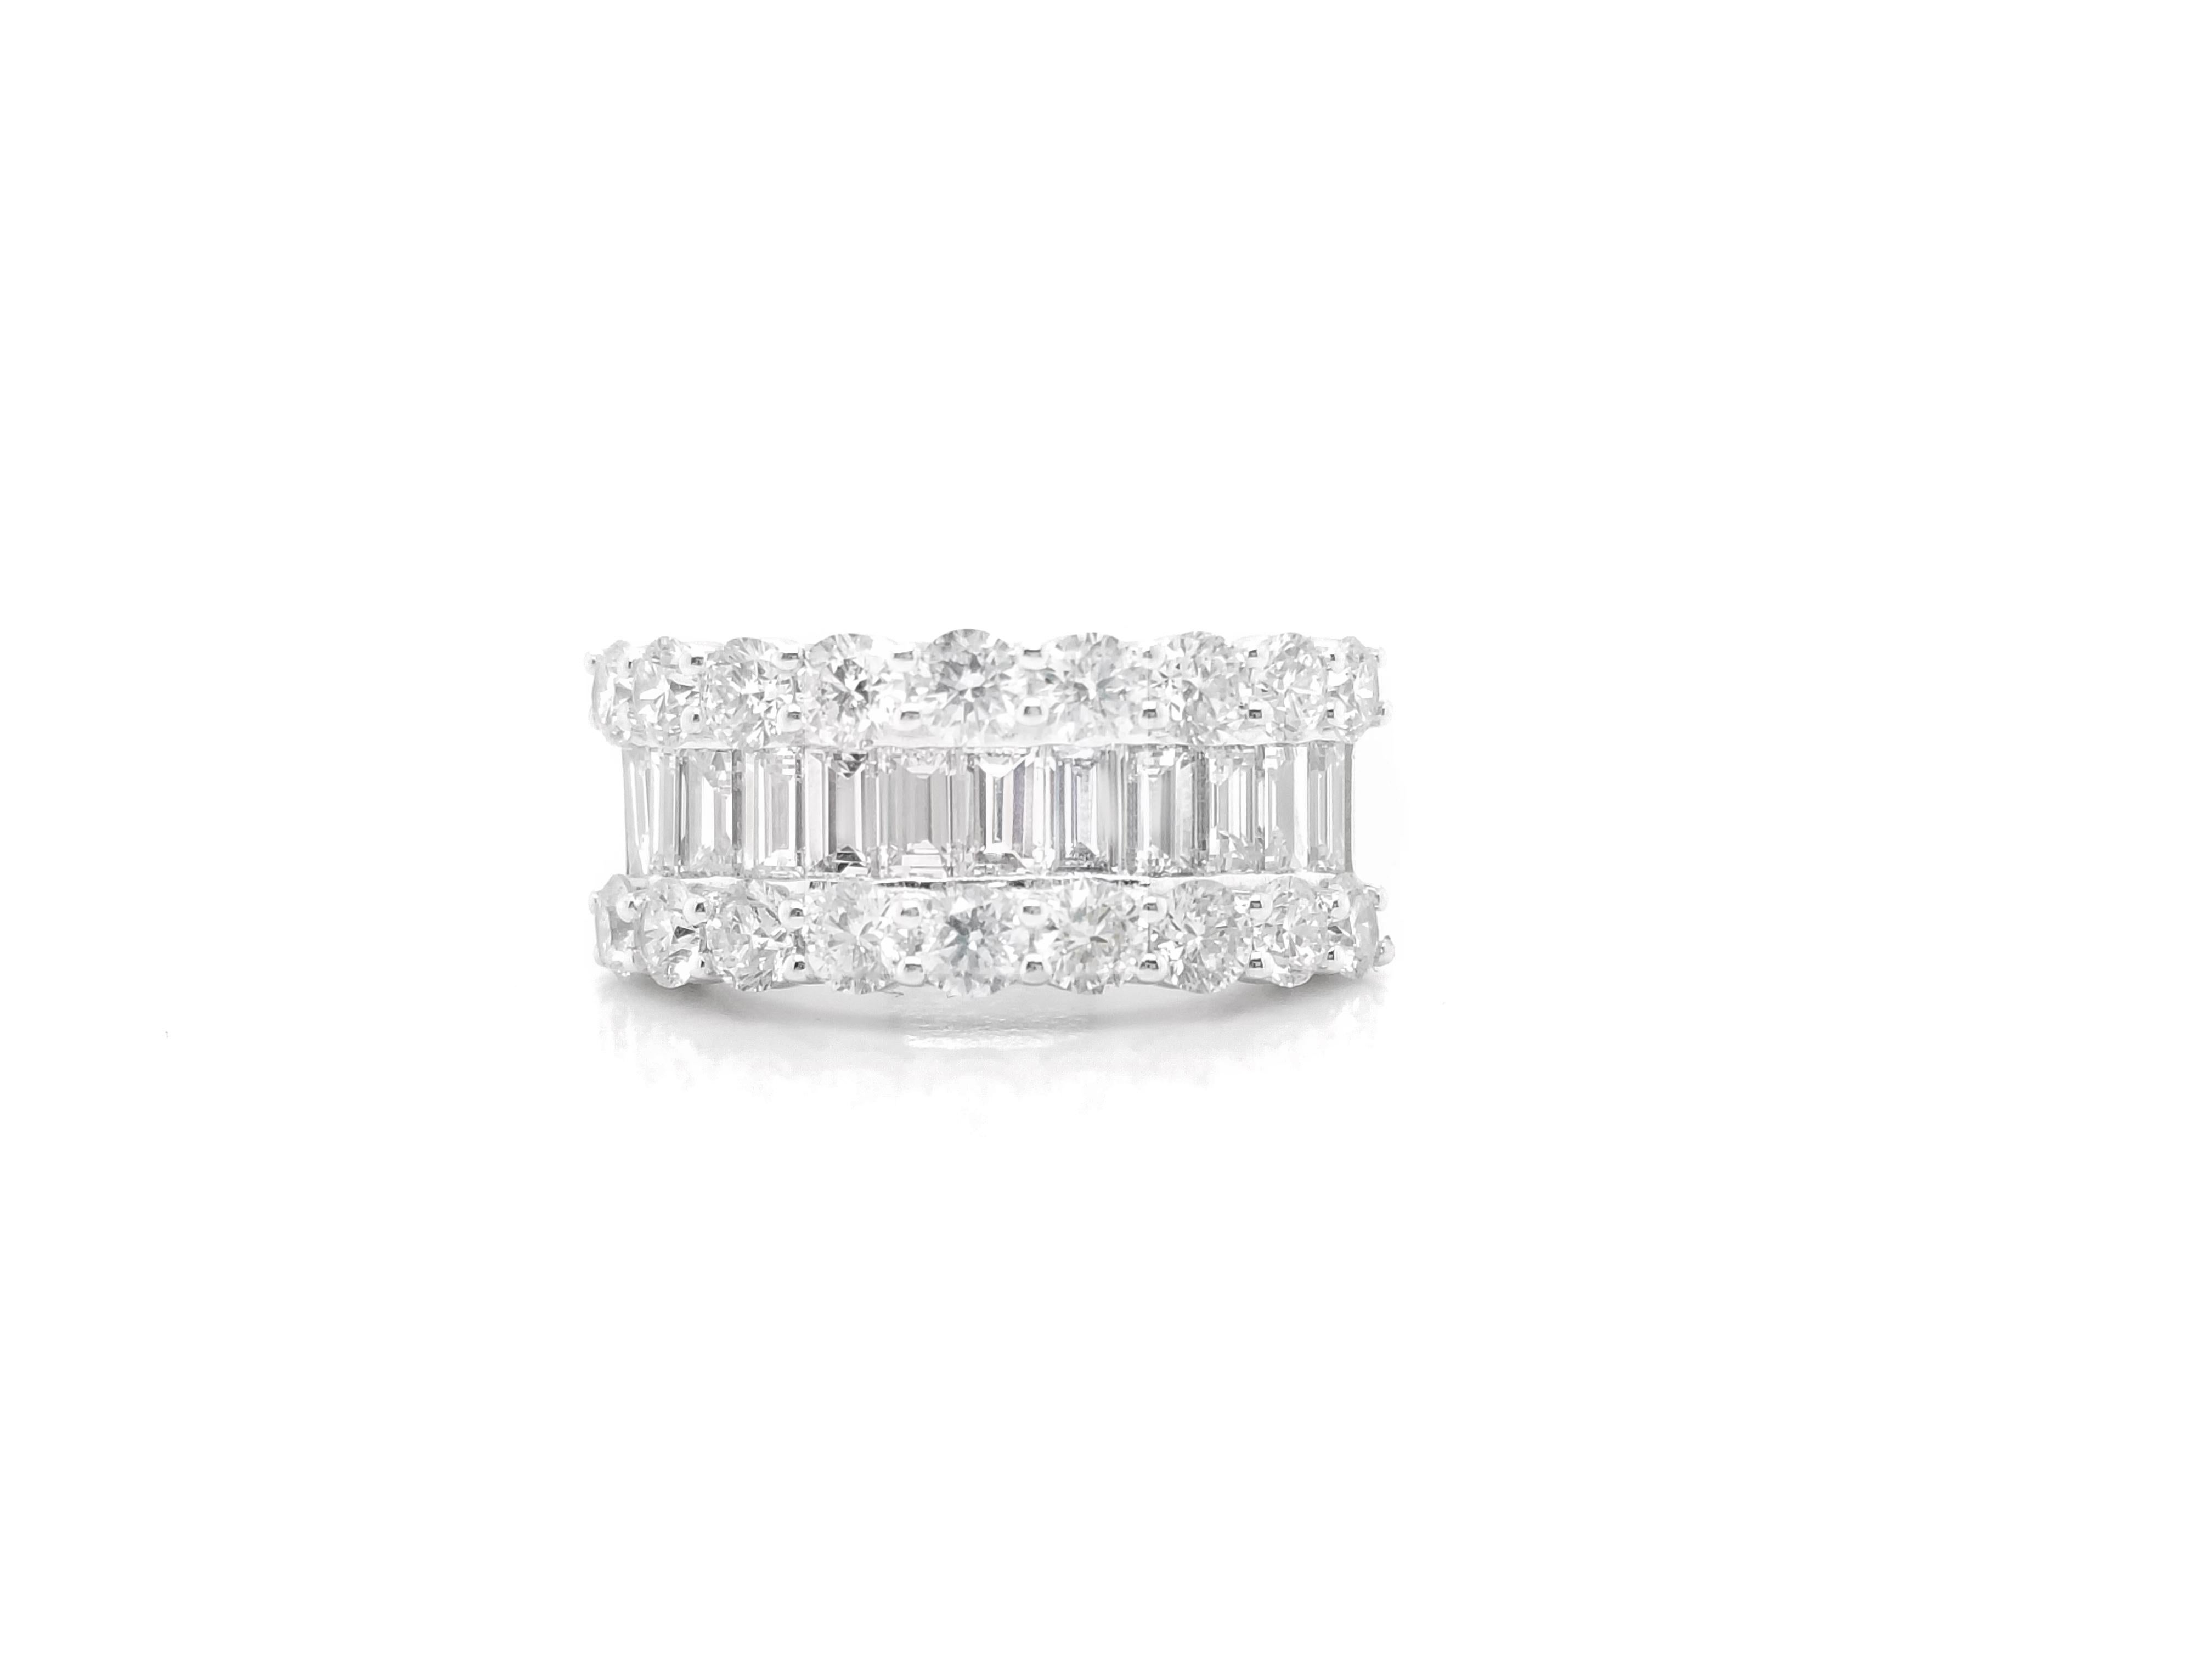 18 karat white gold wedding band features 4.00 cts total of round brilliant and baguette cut diamonds.
Diana M. is a leading supplier of top-quality fine jewelry for over 35 years.
Diana M is one-stop shop for all your jewelry shopping, carrying